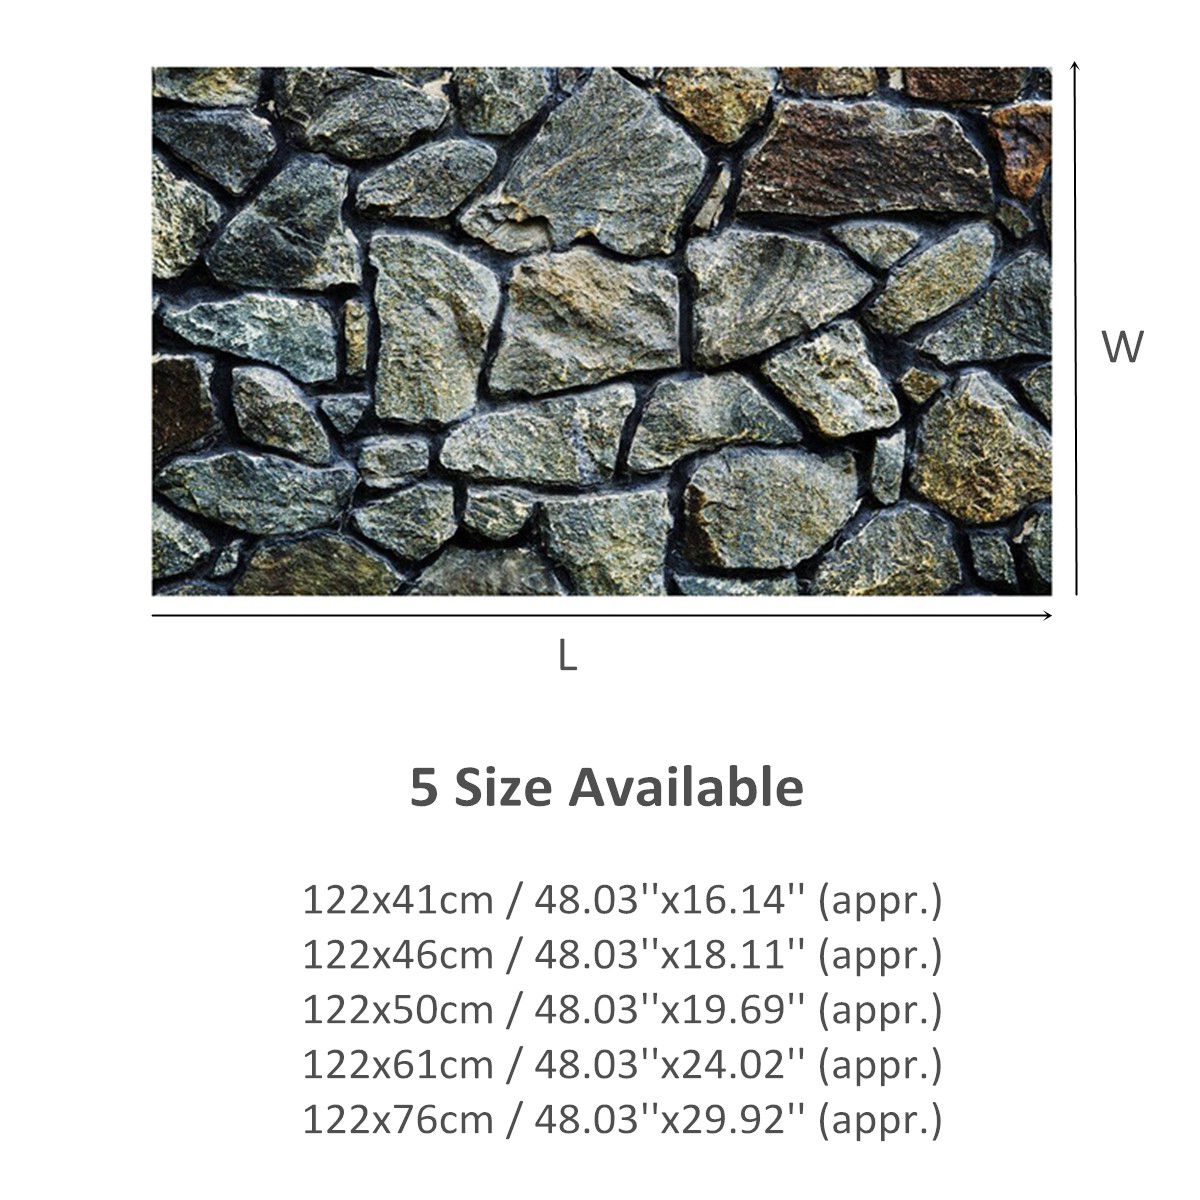 5 Sizes Rock Stone PVC Aquarium Background Poster Fish Tank Wall Picture Landscaping Painting Decorations Self Adhesive